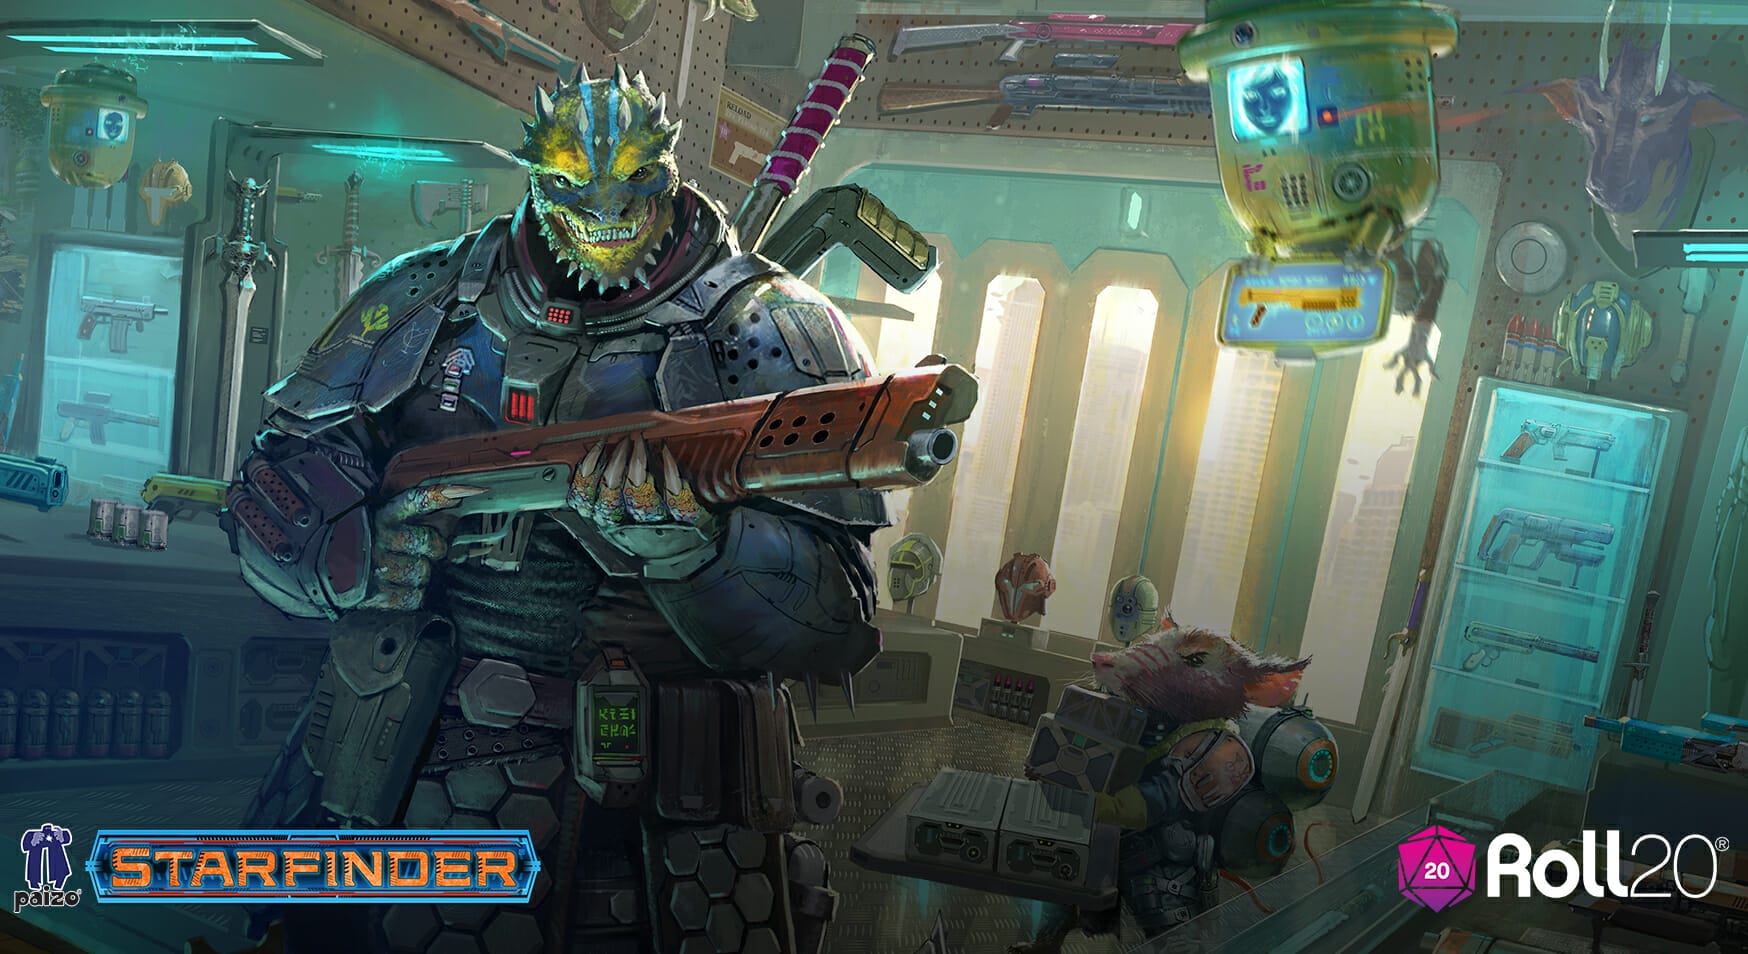 Starfinder's Against the Aeon Throne: The Reach of Empire